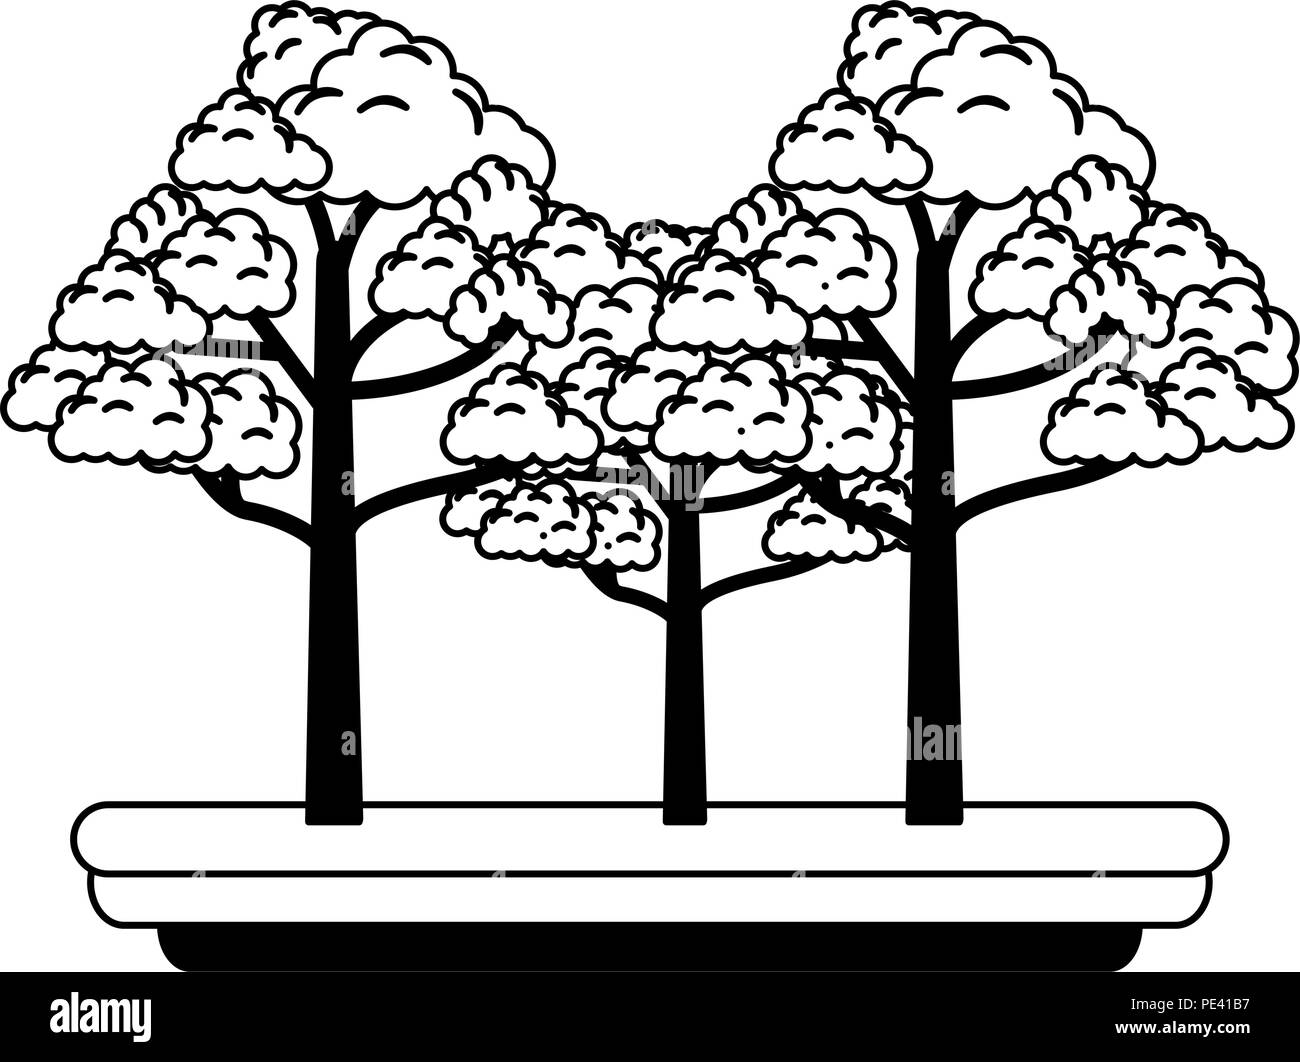 Trees at nature in black and white Stock Vector